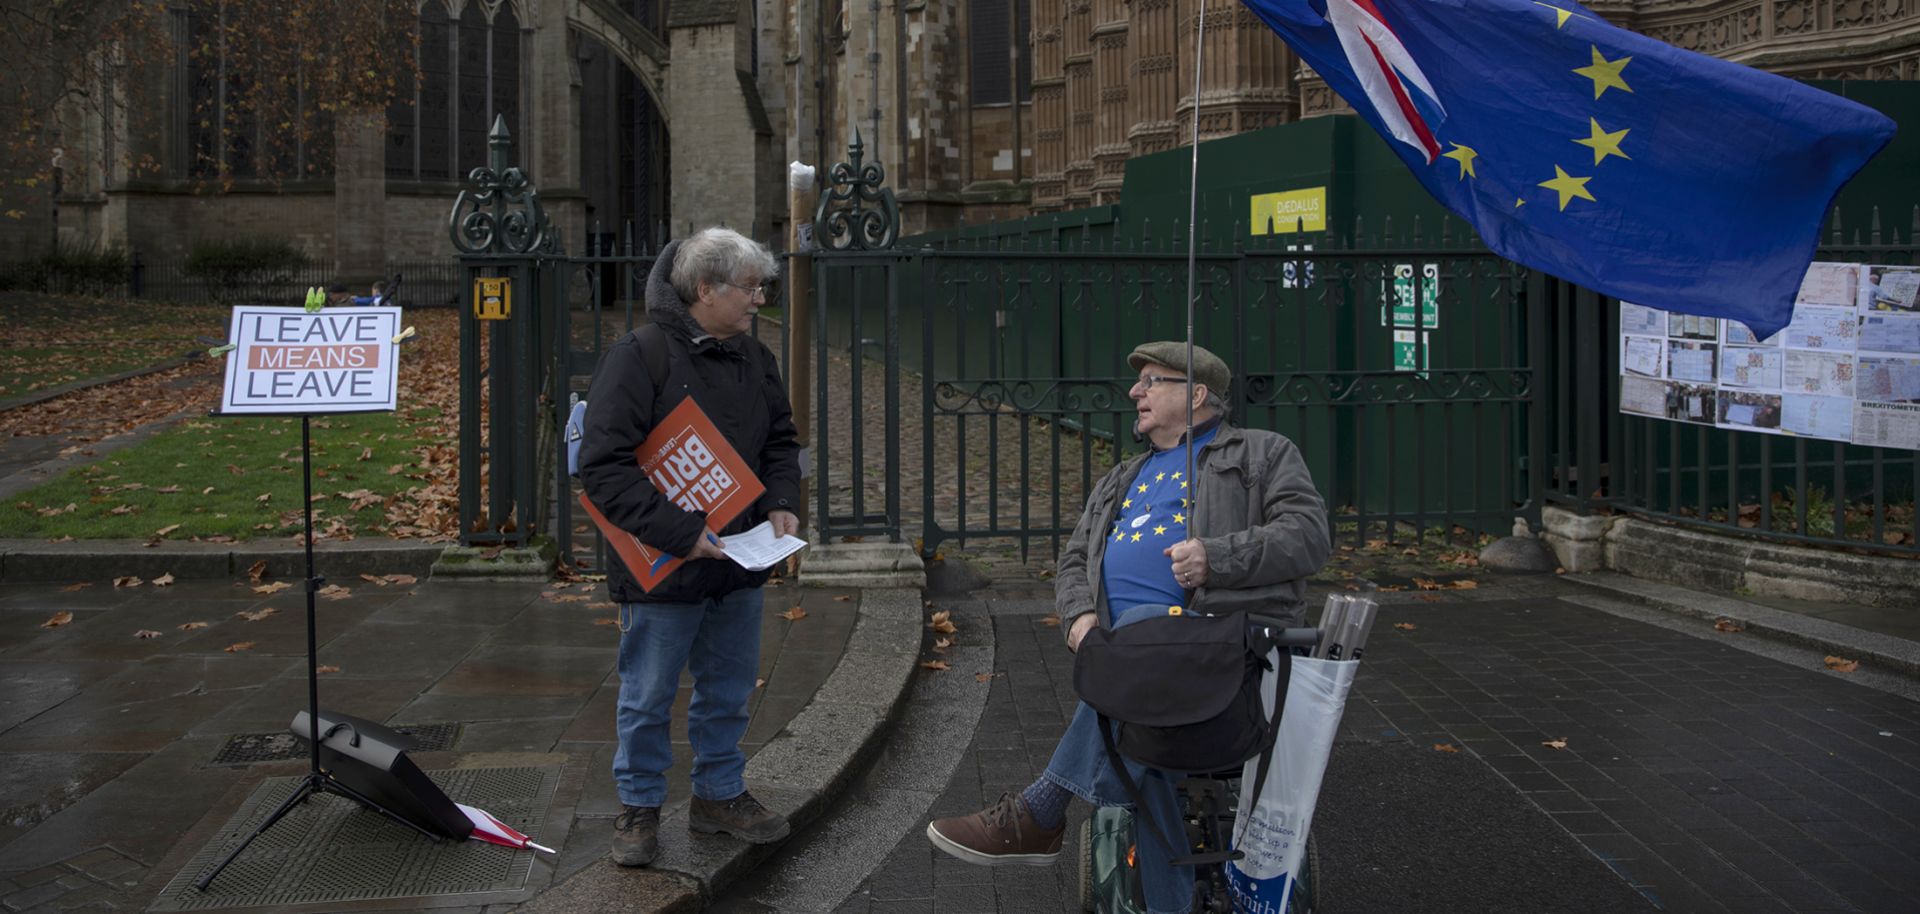 Campaigners on opposite sides of the Brexit issue chat outside the Houses of Parliament on Dec. 5, 2018, in London.